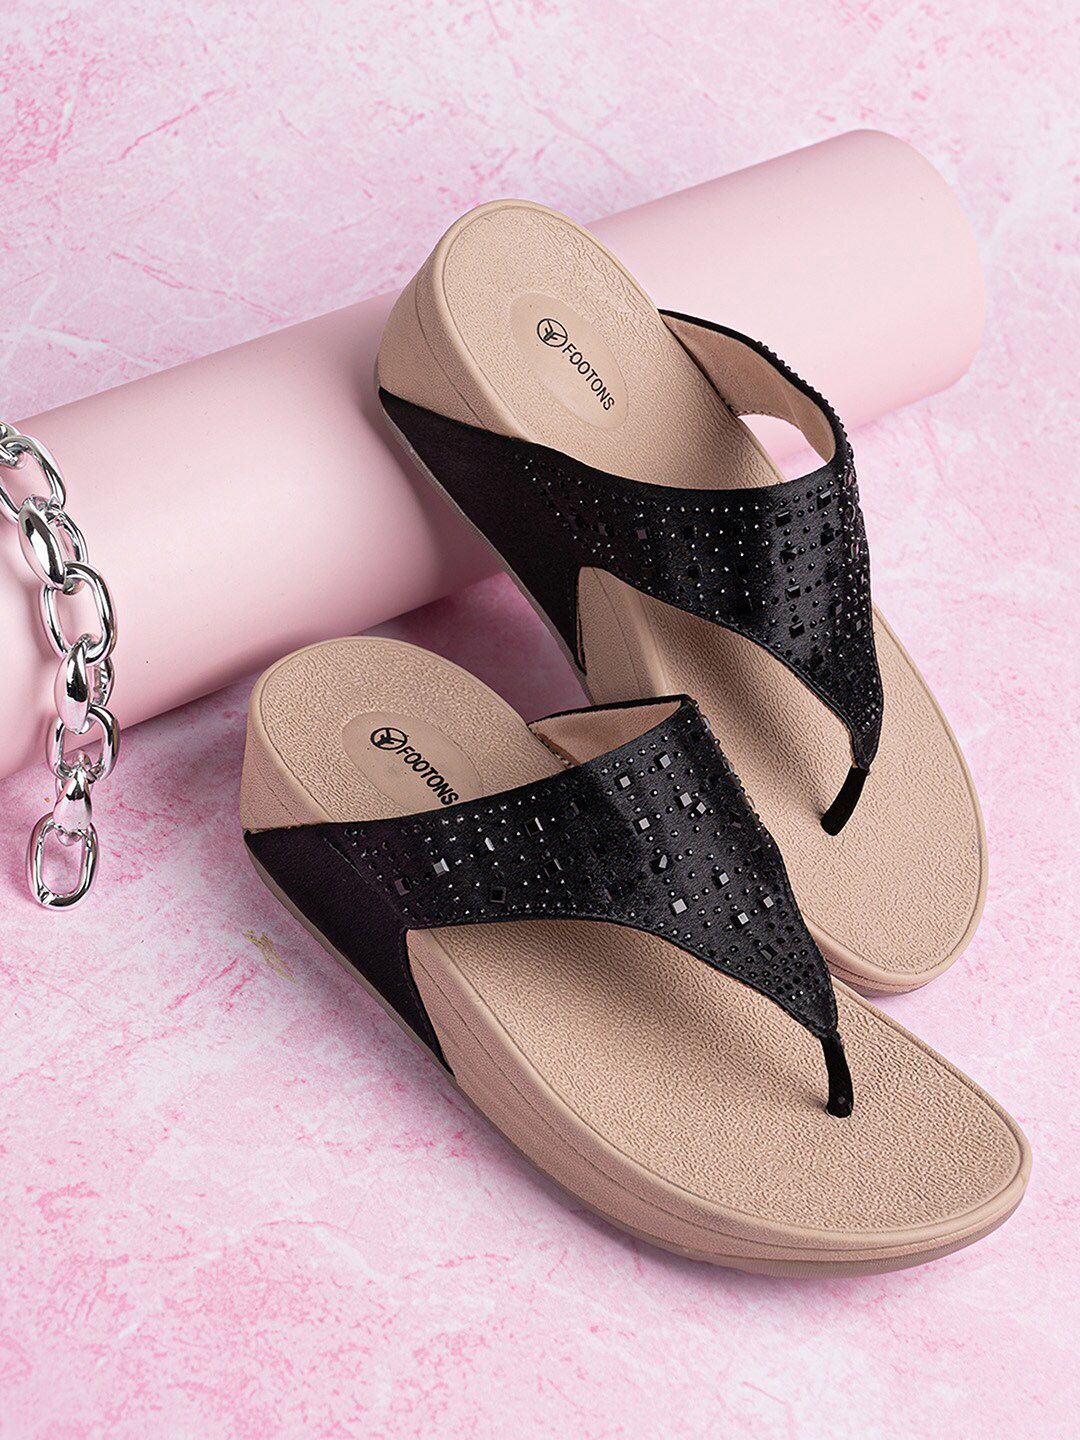 FOOTONS Black Embellished Comfort Sandals with Laser Cuts Price in India